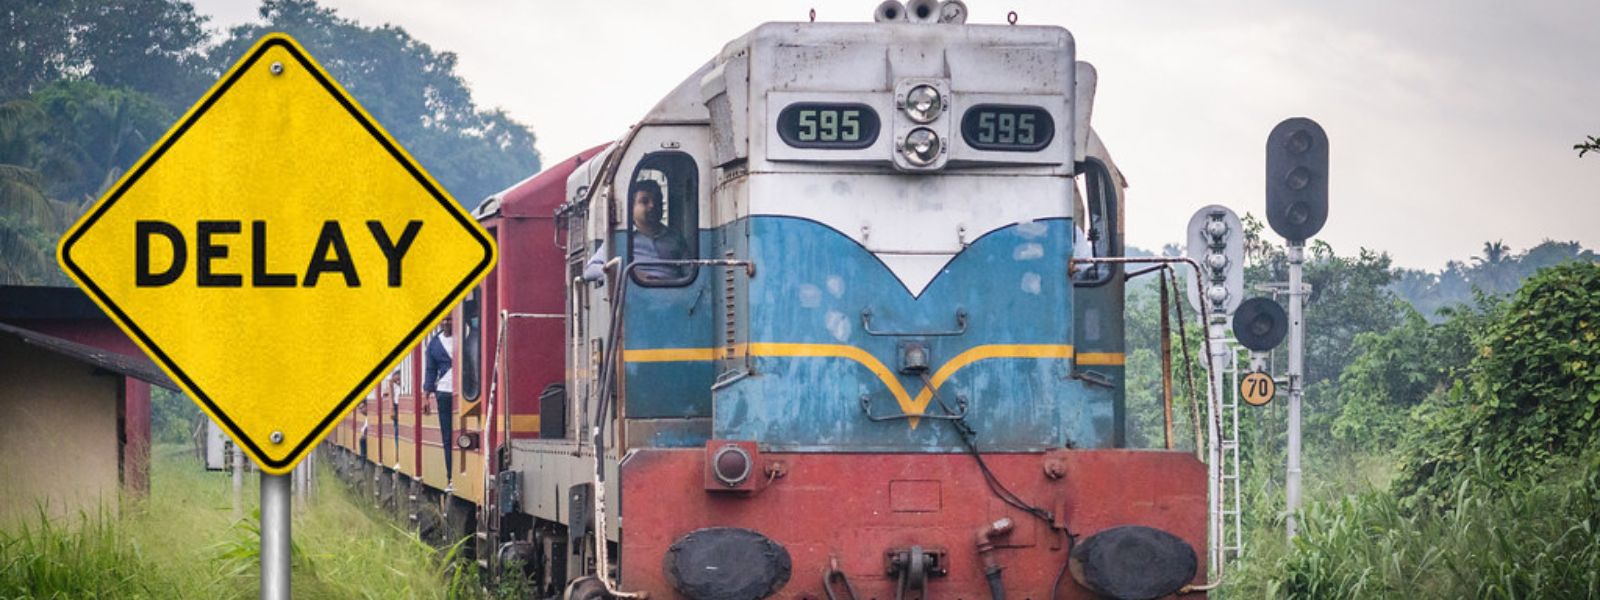 Colombo-Trincomalee Train Conductor Injured After